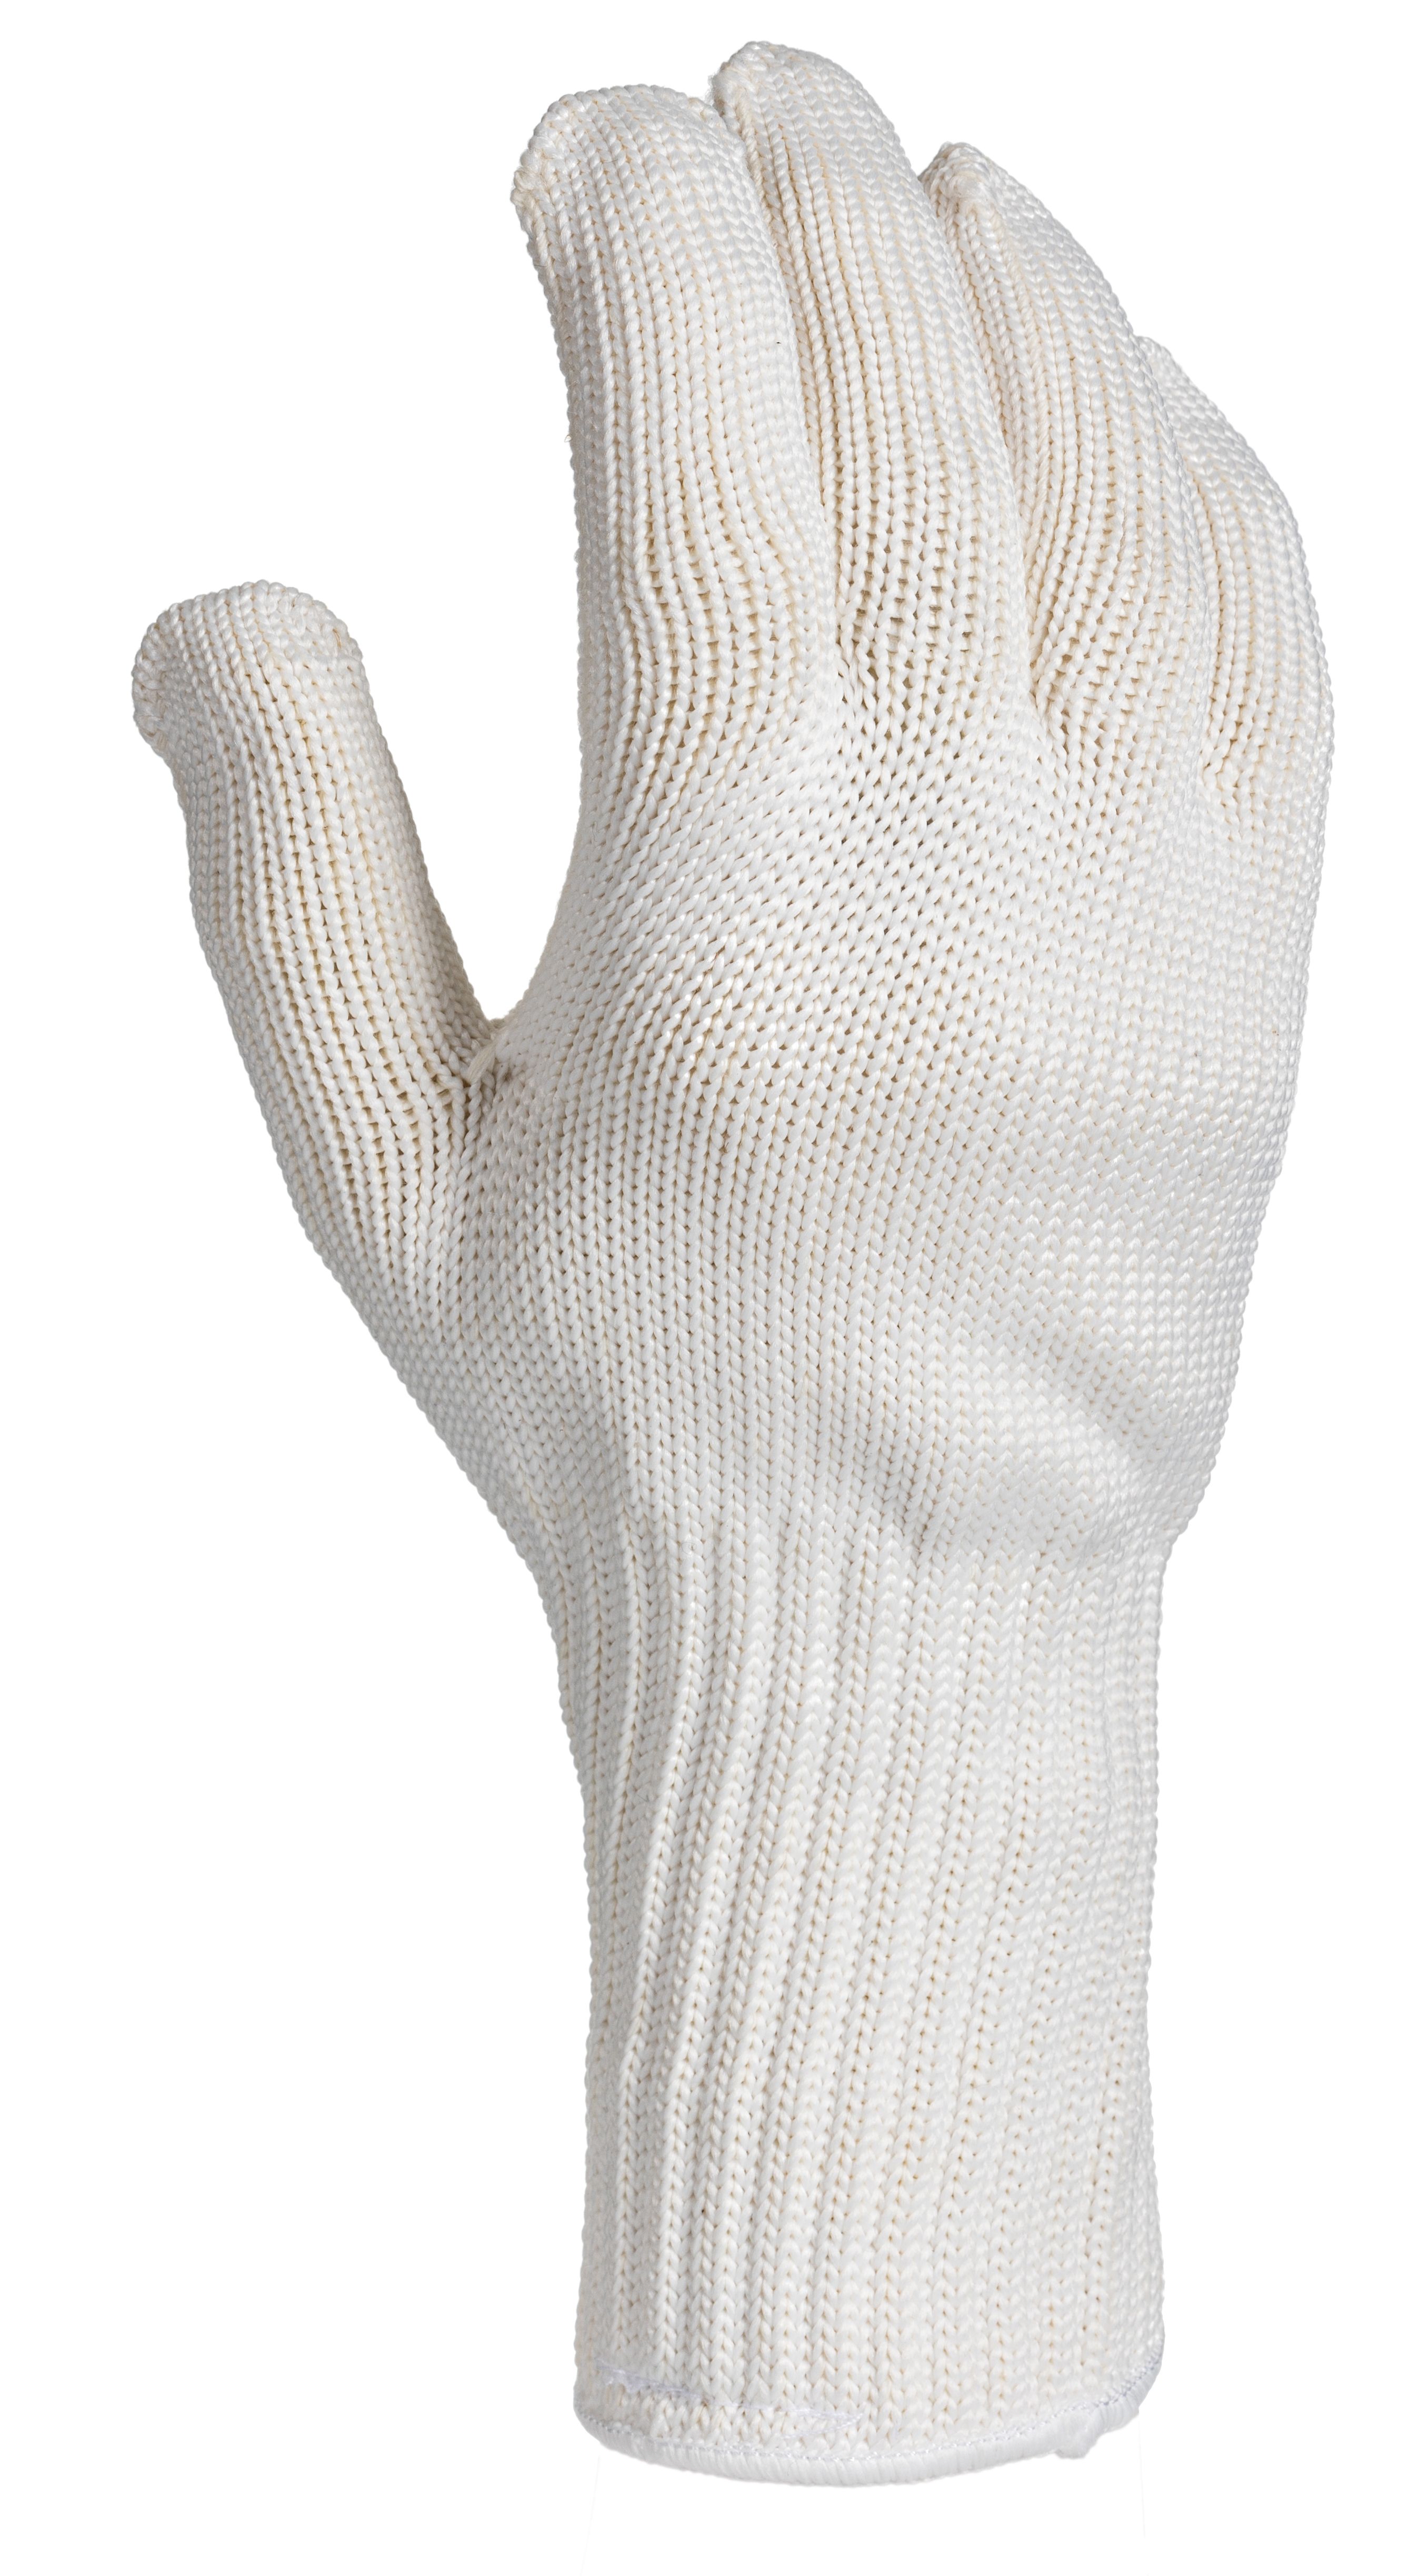 SKF TMBA White Heat Resistant Work Gloves, Size 9, Large, Hytex Lining